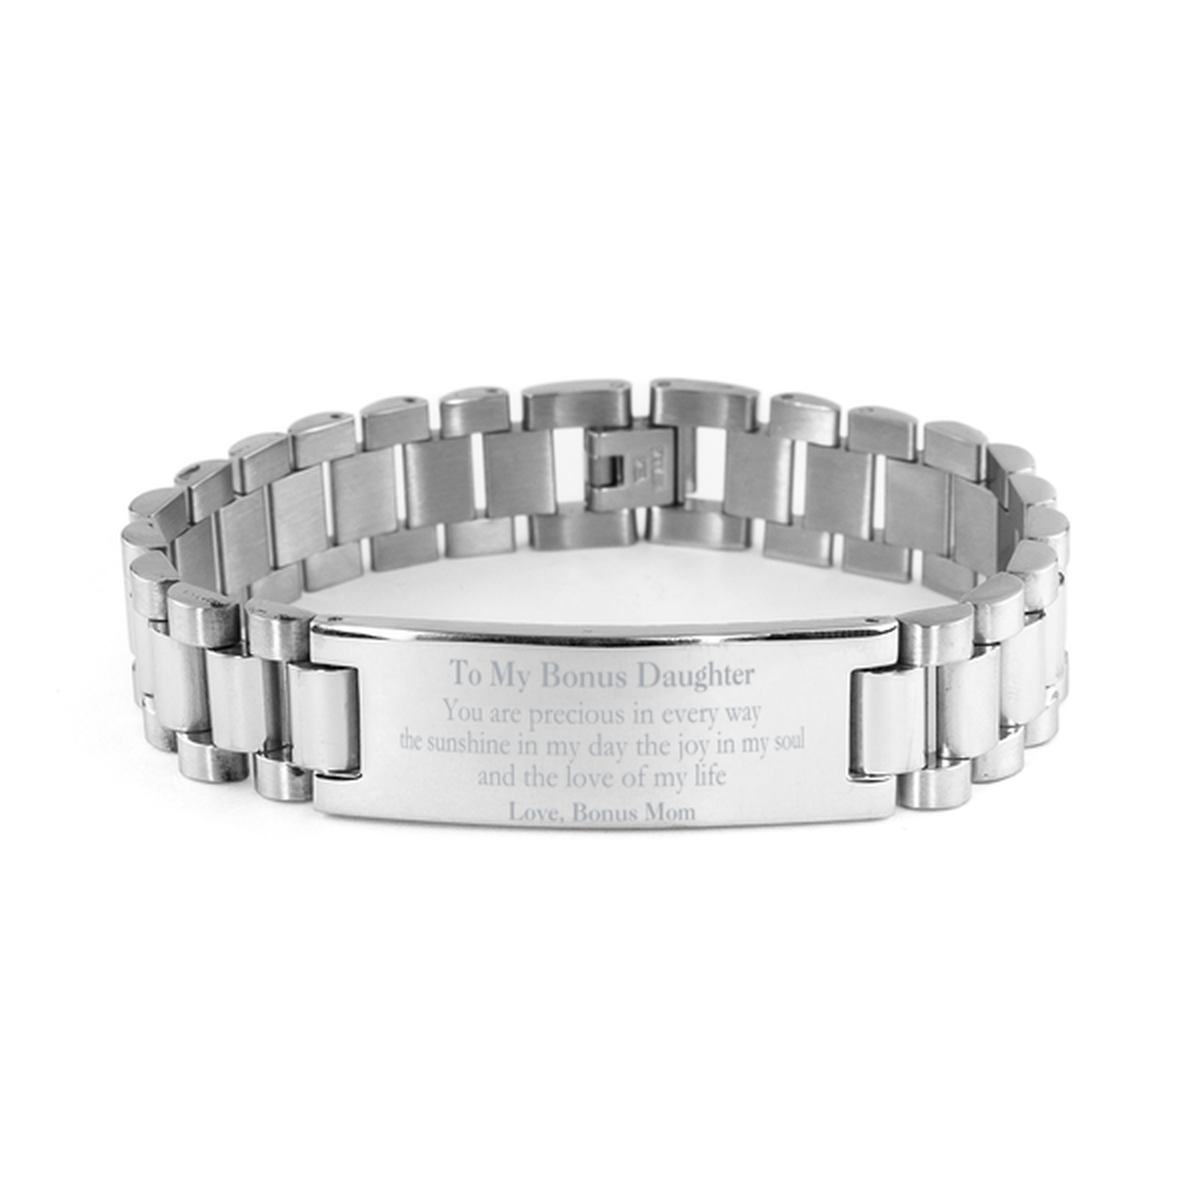 Graduation Gifts for Bonus Daughter Ladder Stainless Steel Bracelet Present from Bonus Mom, Christmas Bonus Daughter Birthday Gifts Bonus Daughter You are precious in every way the sunshine in my day. Love, Bonus Mom